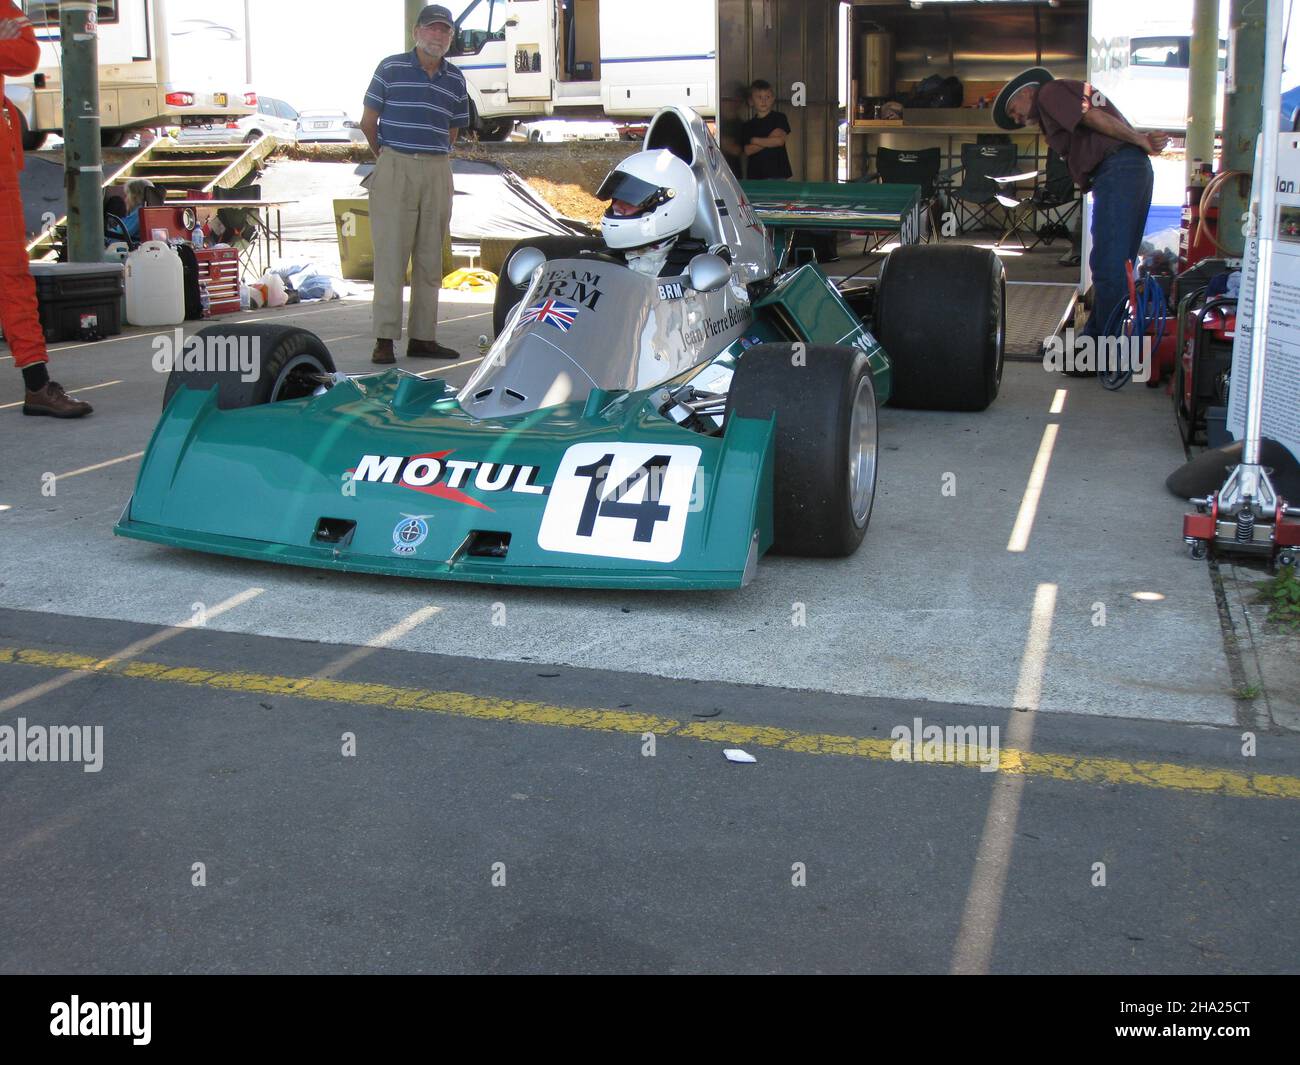 The ex-Jean-Pierre Beltoise #14 BRM P201 owned by Peter and Aaron Burson in the Pukekohe pits at the 2009 Tasman Grand Prix meeting. Lunch time demo. Stock Photo